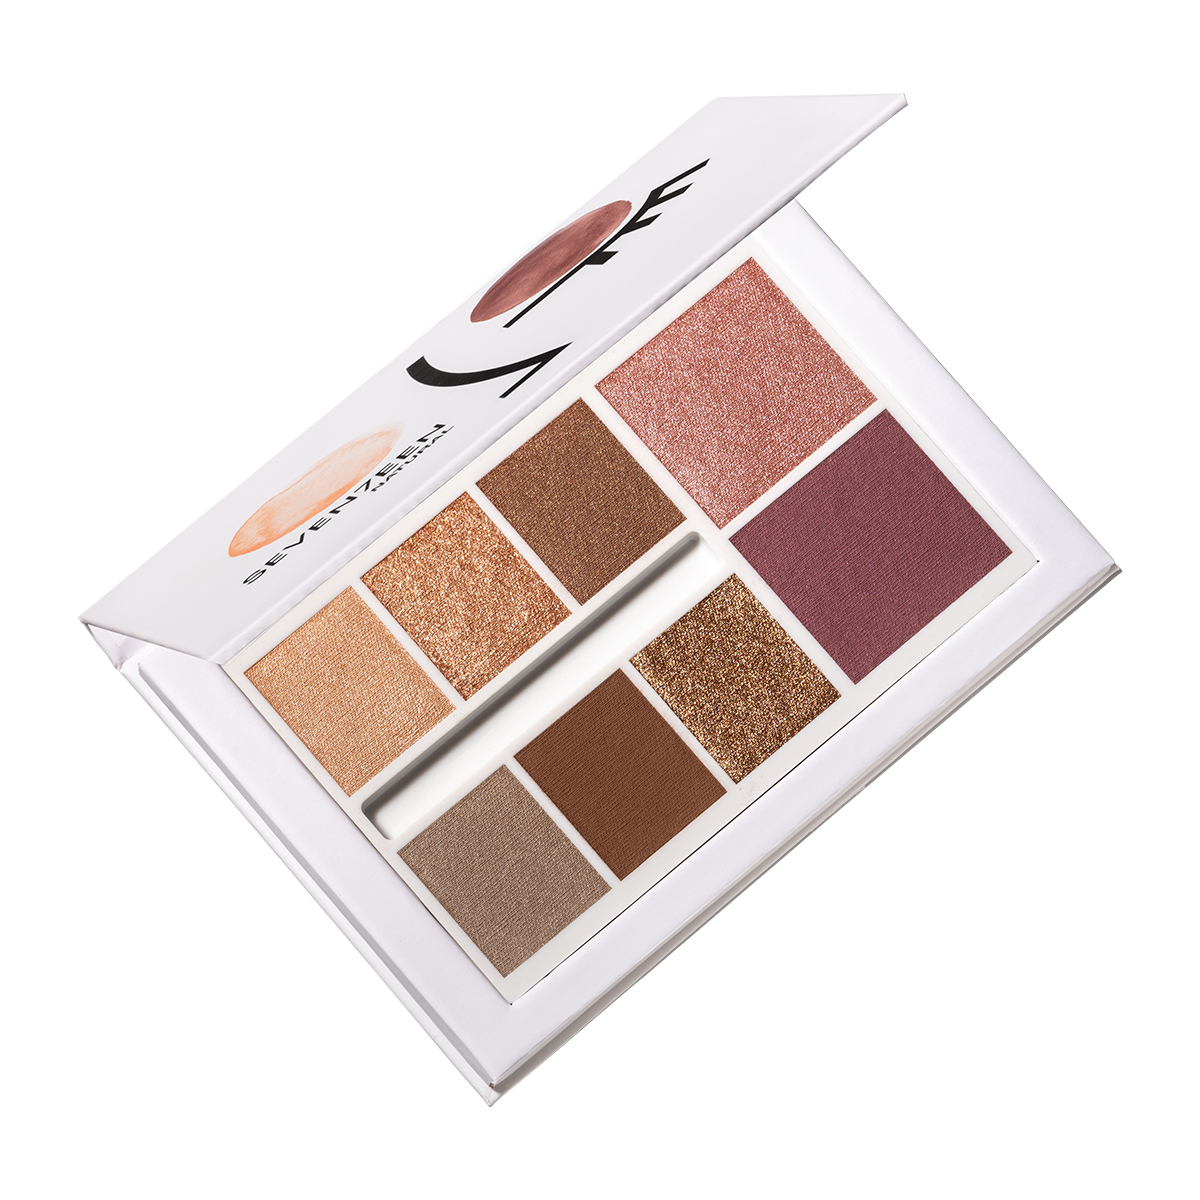 Limited edition total look palette in wark earthy tones